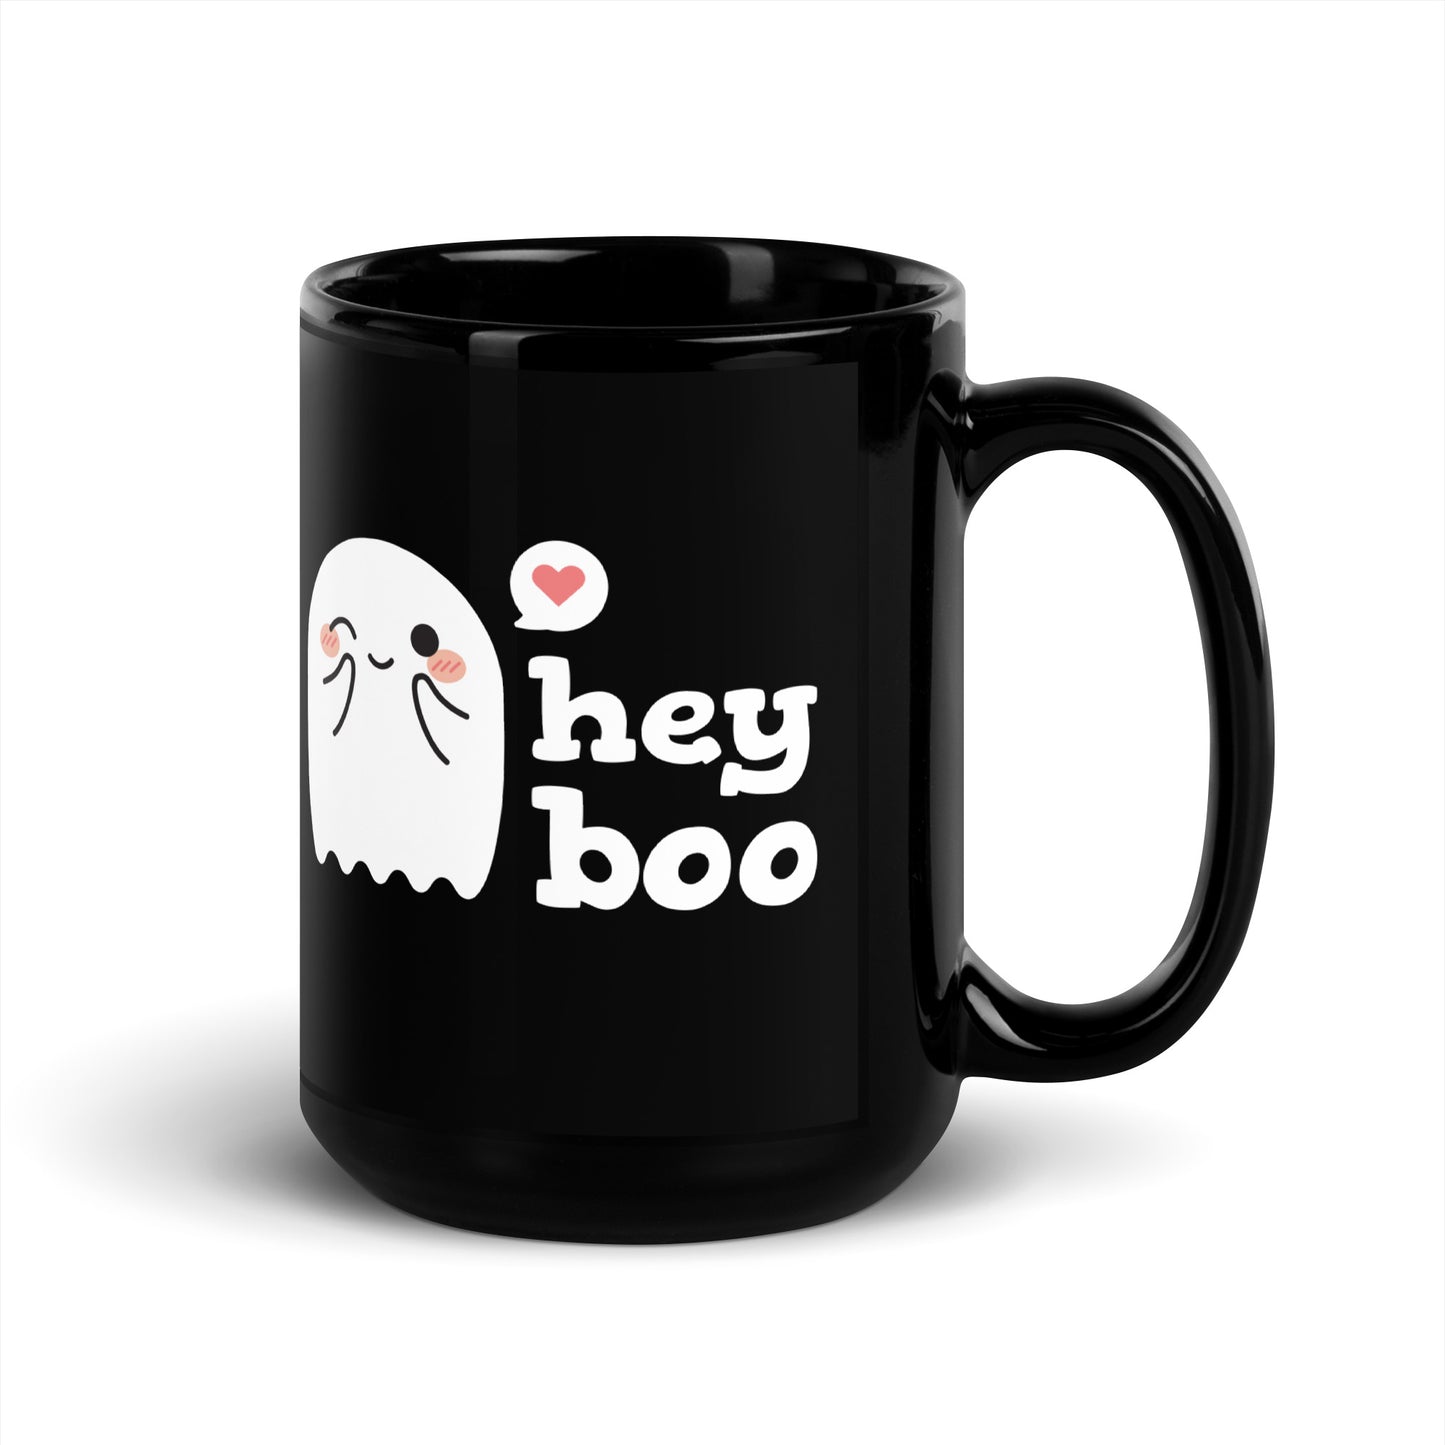 A black 15 ounce coffee mug featuring an illustration of a blushing and smiling ghost next to text that reads "hey boo"